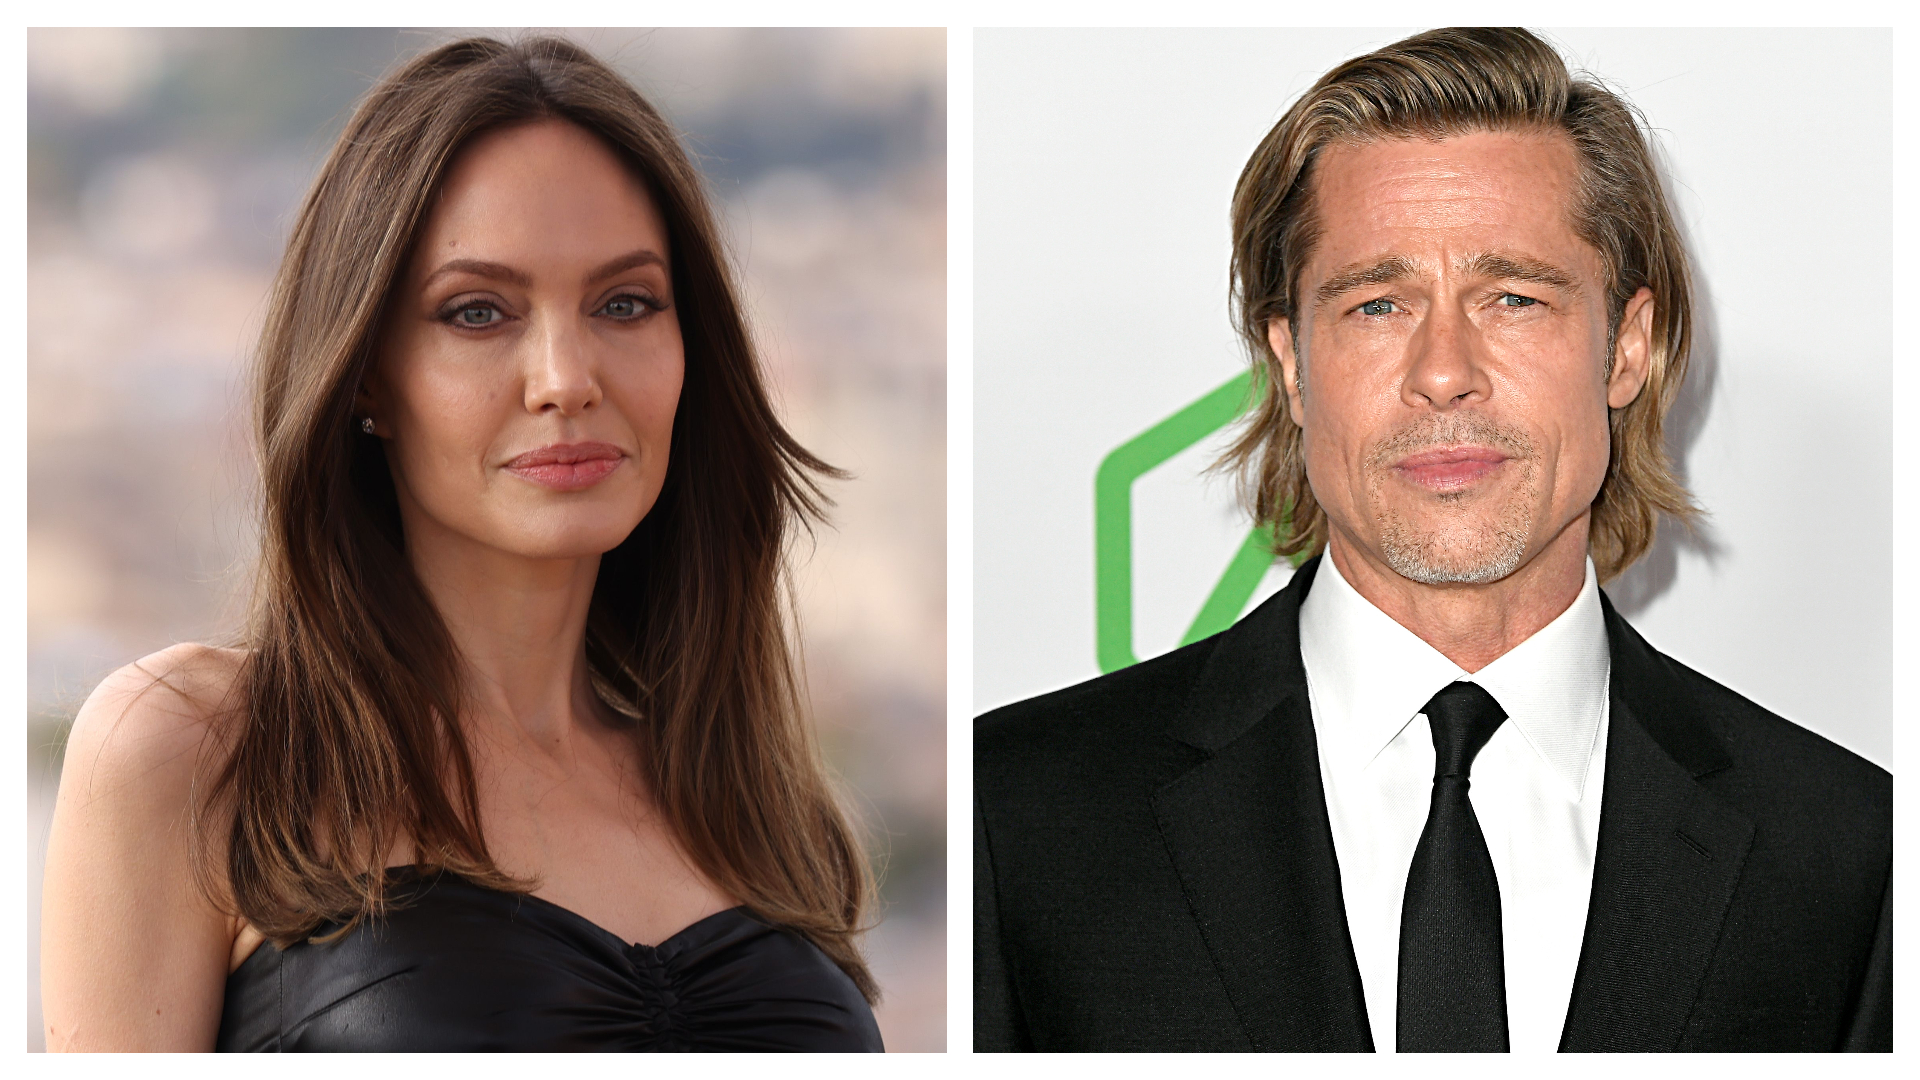 Brad Pitt’s Rep Disputes Details in Angelina Jolie’s Latest Allegations About 2016 Airplane Incident